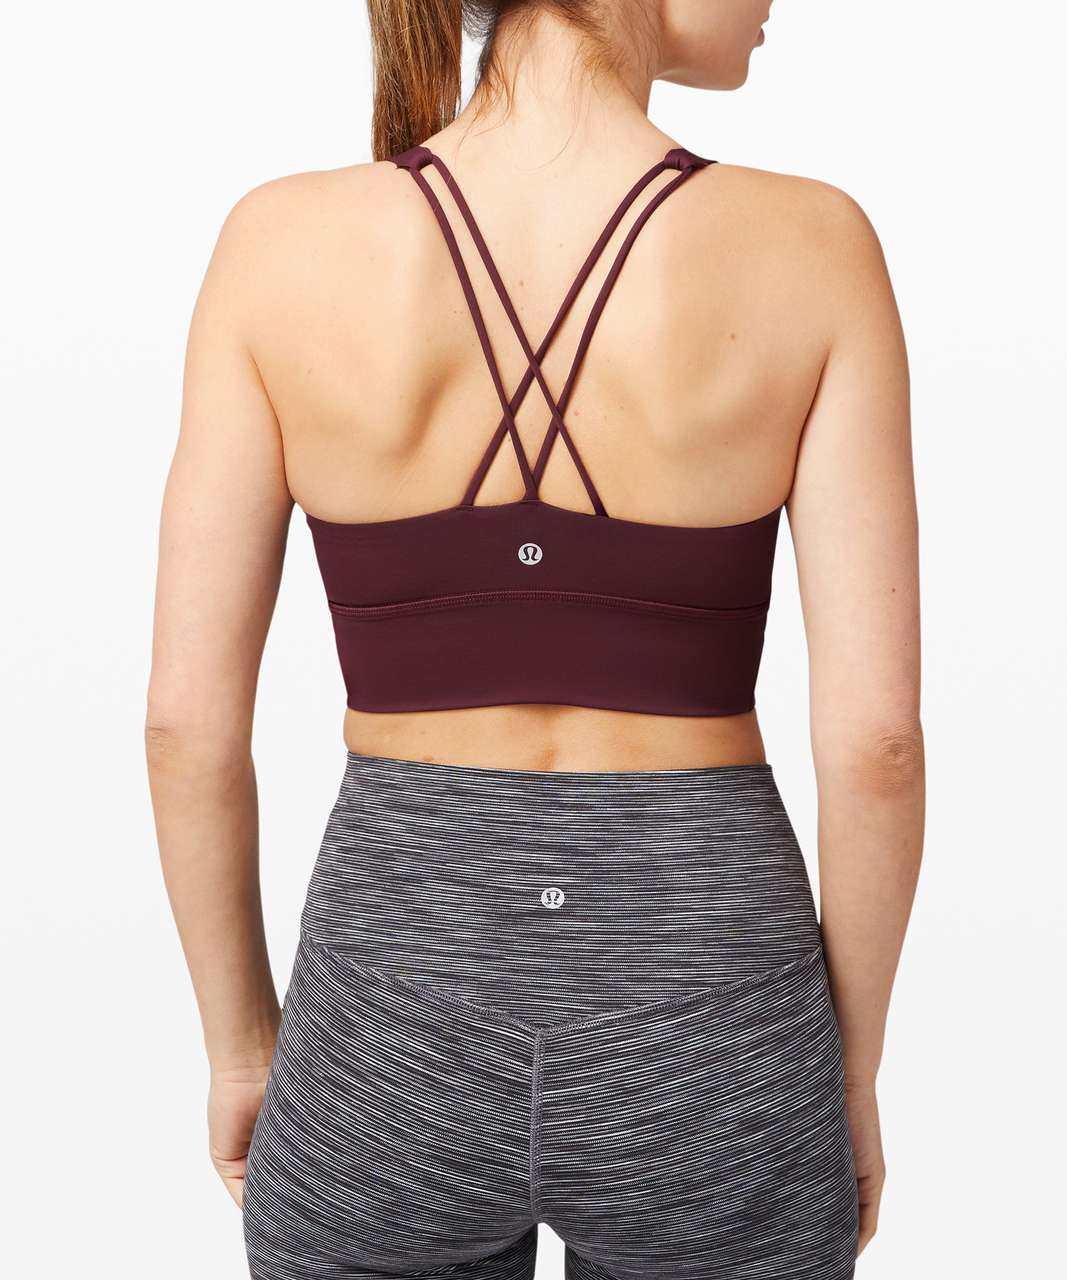 Lululemon Free To Be Bra Long Line *Light Support, A/B Cup (Online Only) - Cassis